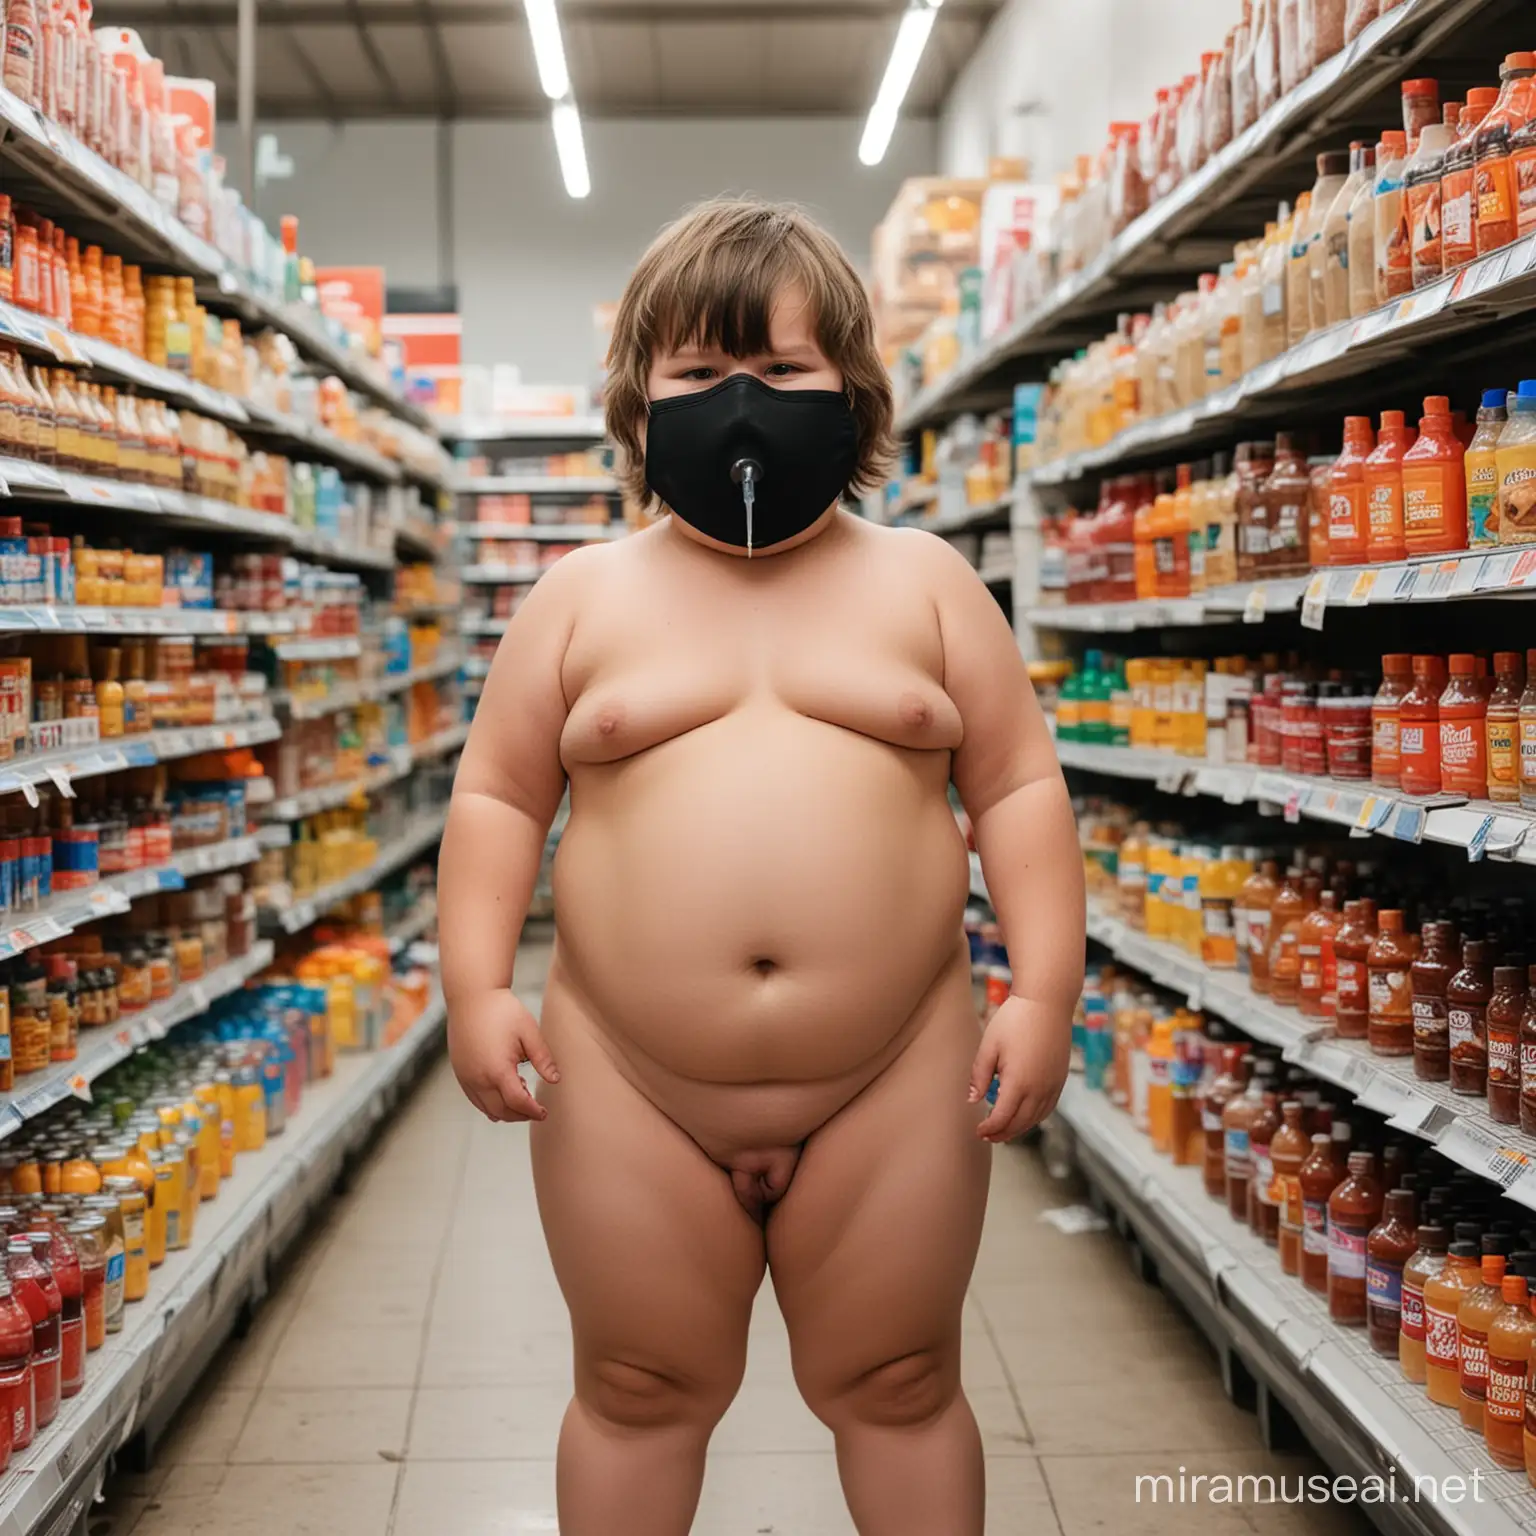 Morbidly Obese little boy taking a poo behind the outside of a super market naked with huge red nipples and long and a middle part haircut with a black medical mask on with vitamin water and fried chicken next to him along with his parents smoking vapes in the background